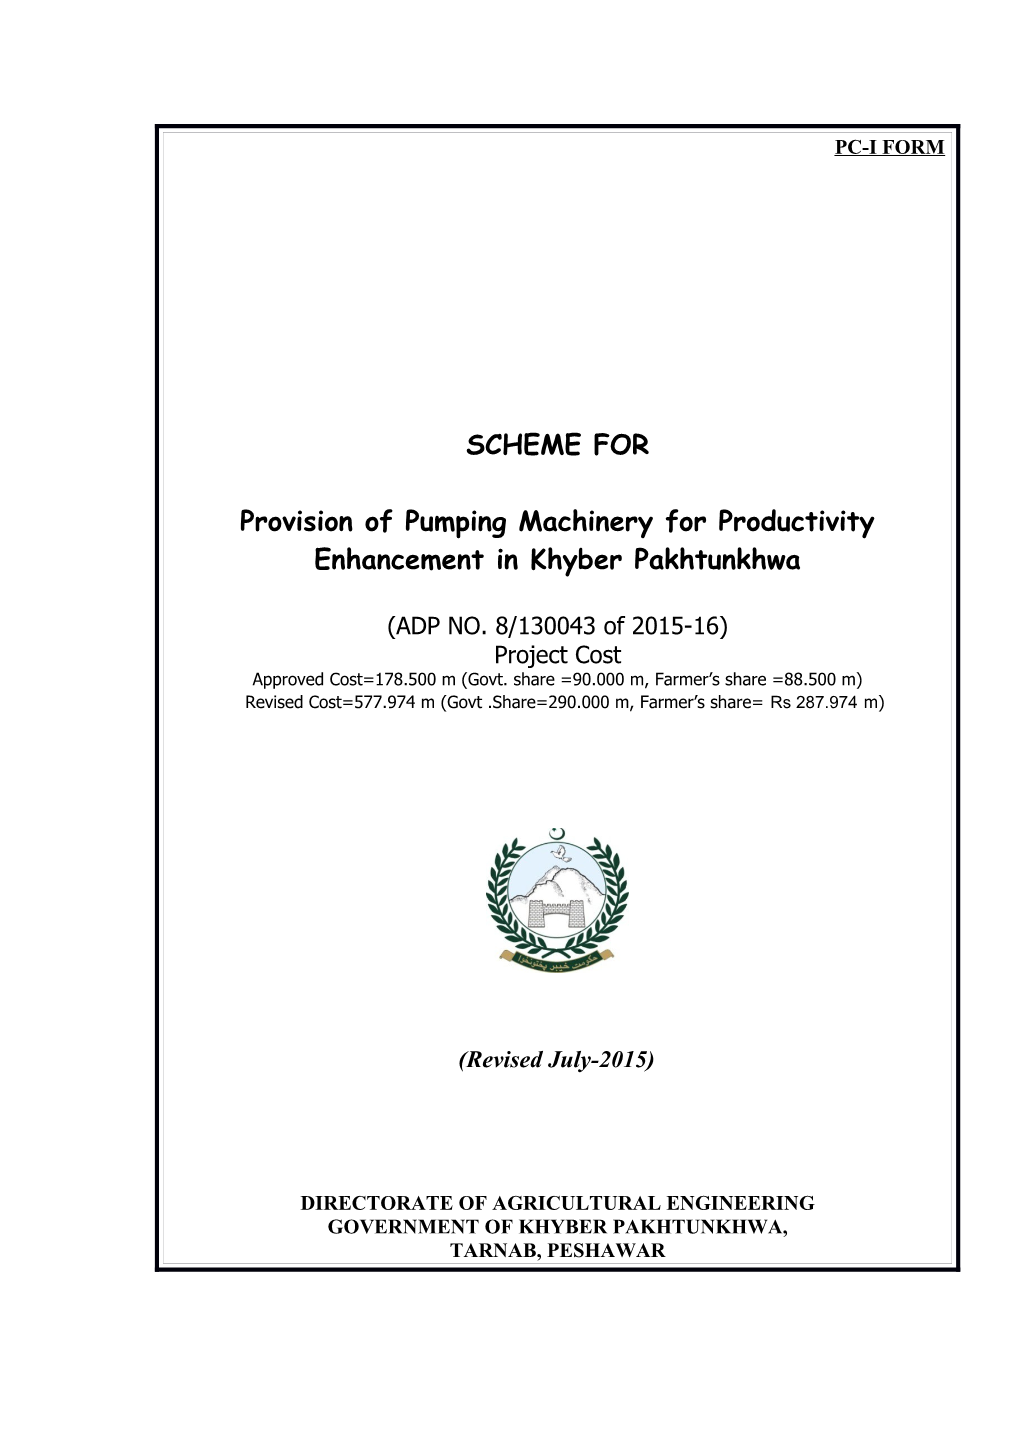 Provision of Pumping Machinery for Productivity Enhancement in Khyber Pakhtunkhwa